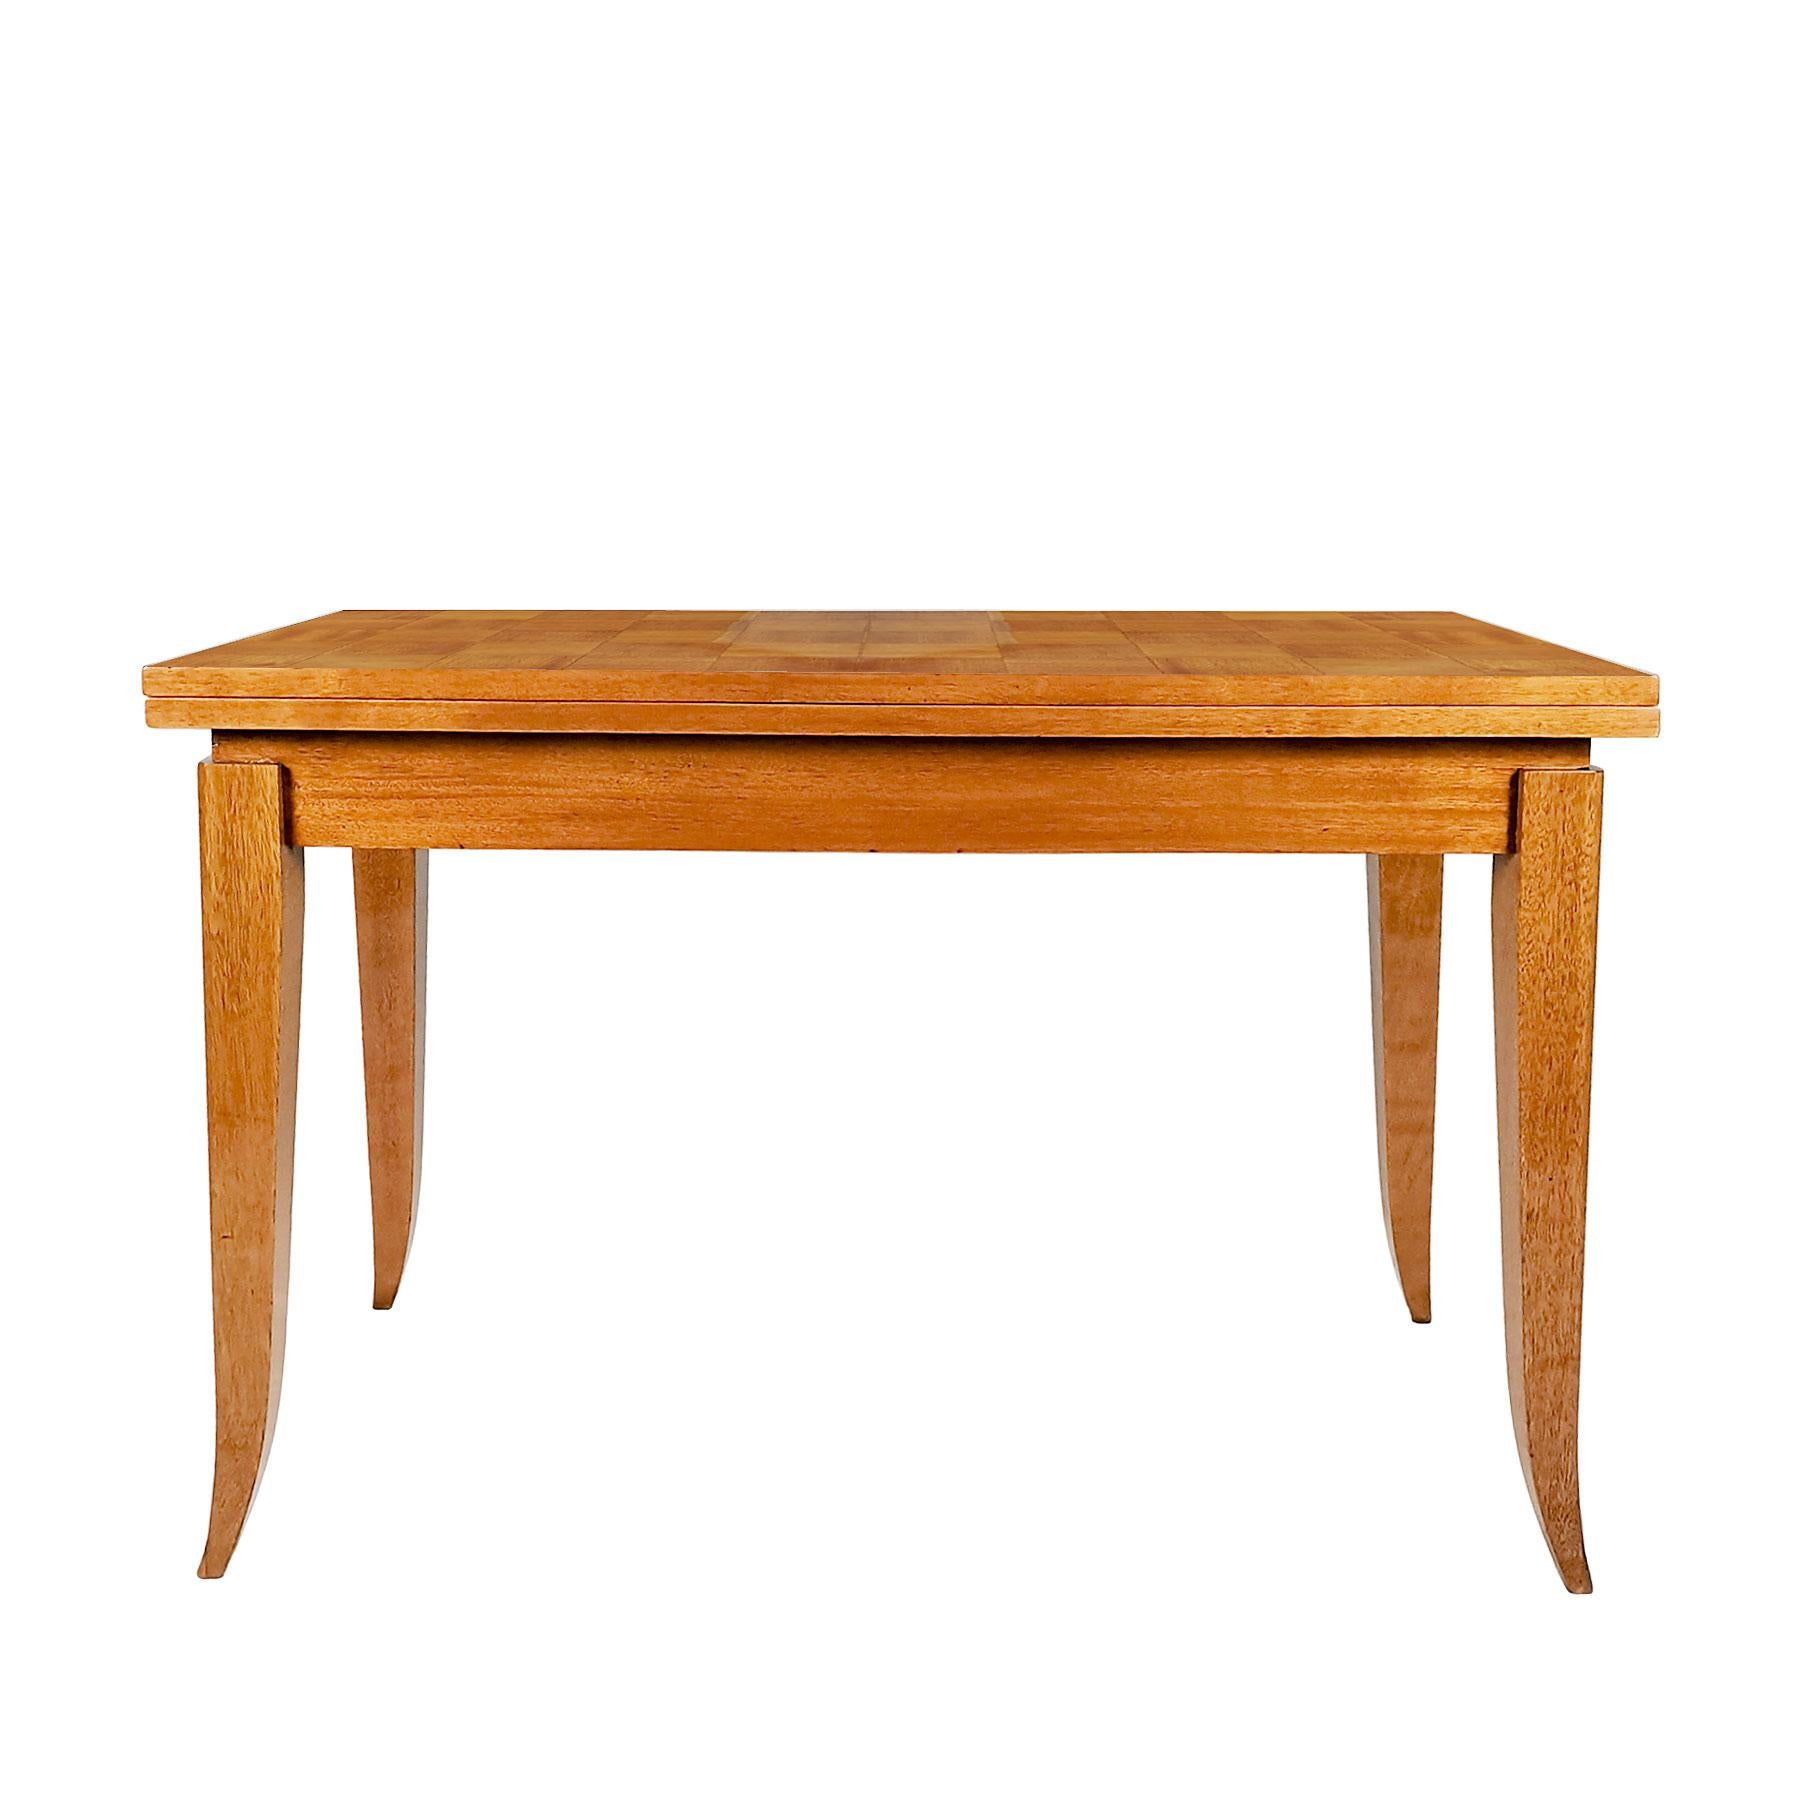 Game table, solid light mahogany base with a double flap top, with a light mahogany parquet veneer, French polish. Polished brass hardware.
France, circa 1940

Measurement open: 110 x 110 x 73 cm.